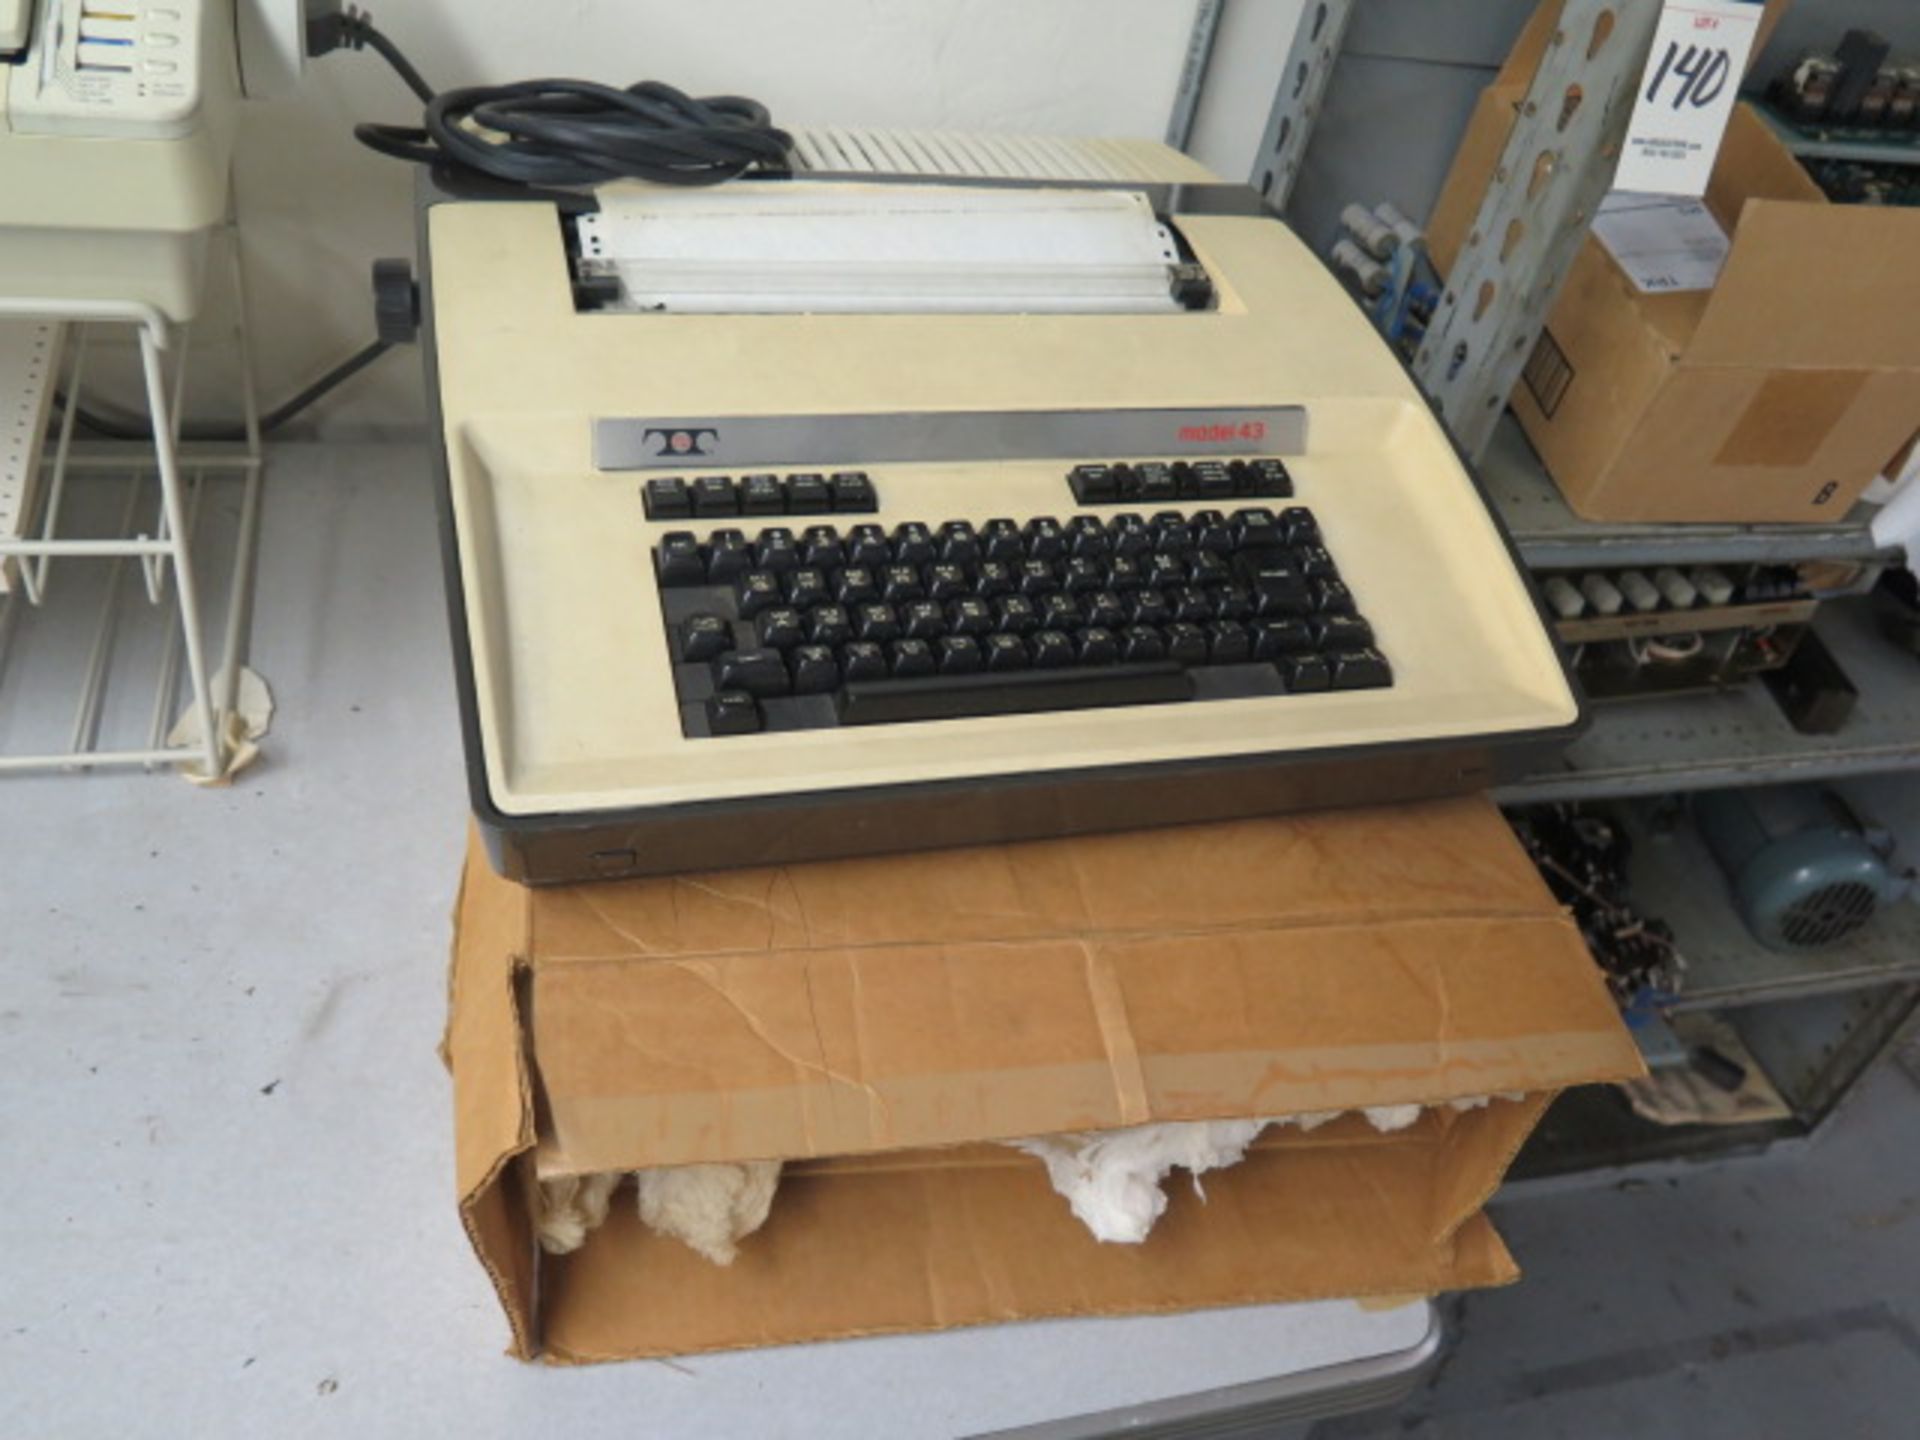 Teletype mdl. 43 Data Terminal and Computer w/ Desk - Image 3 of 4